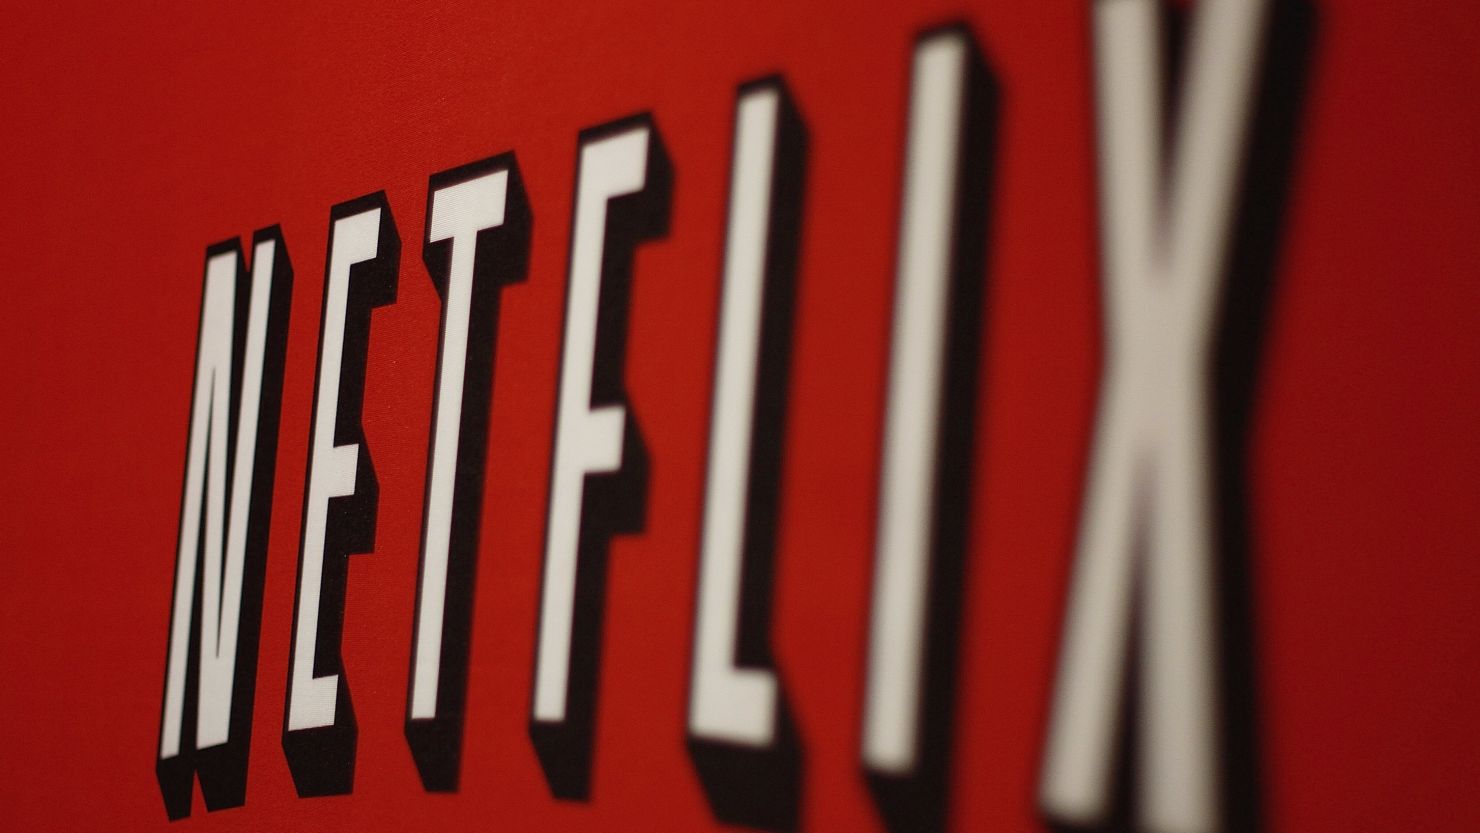 Netflix's plan to split itself into two services received mixed reactions online from customers and bloggers.